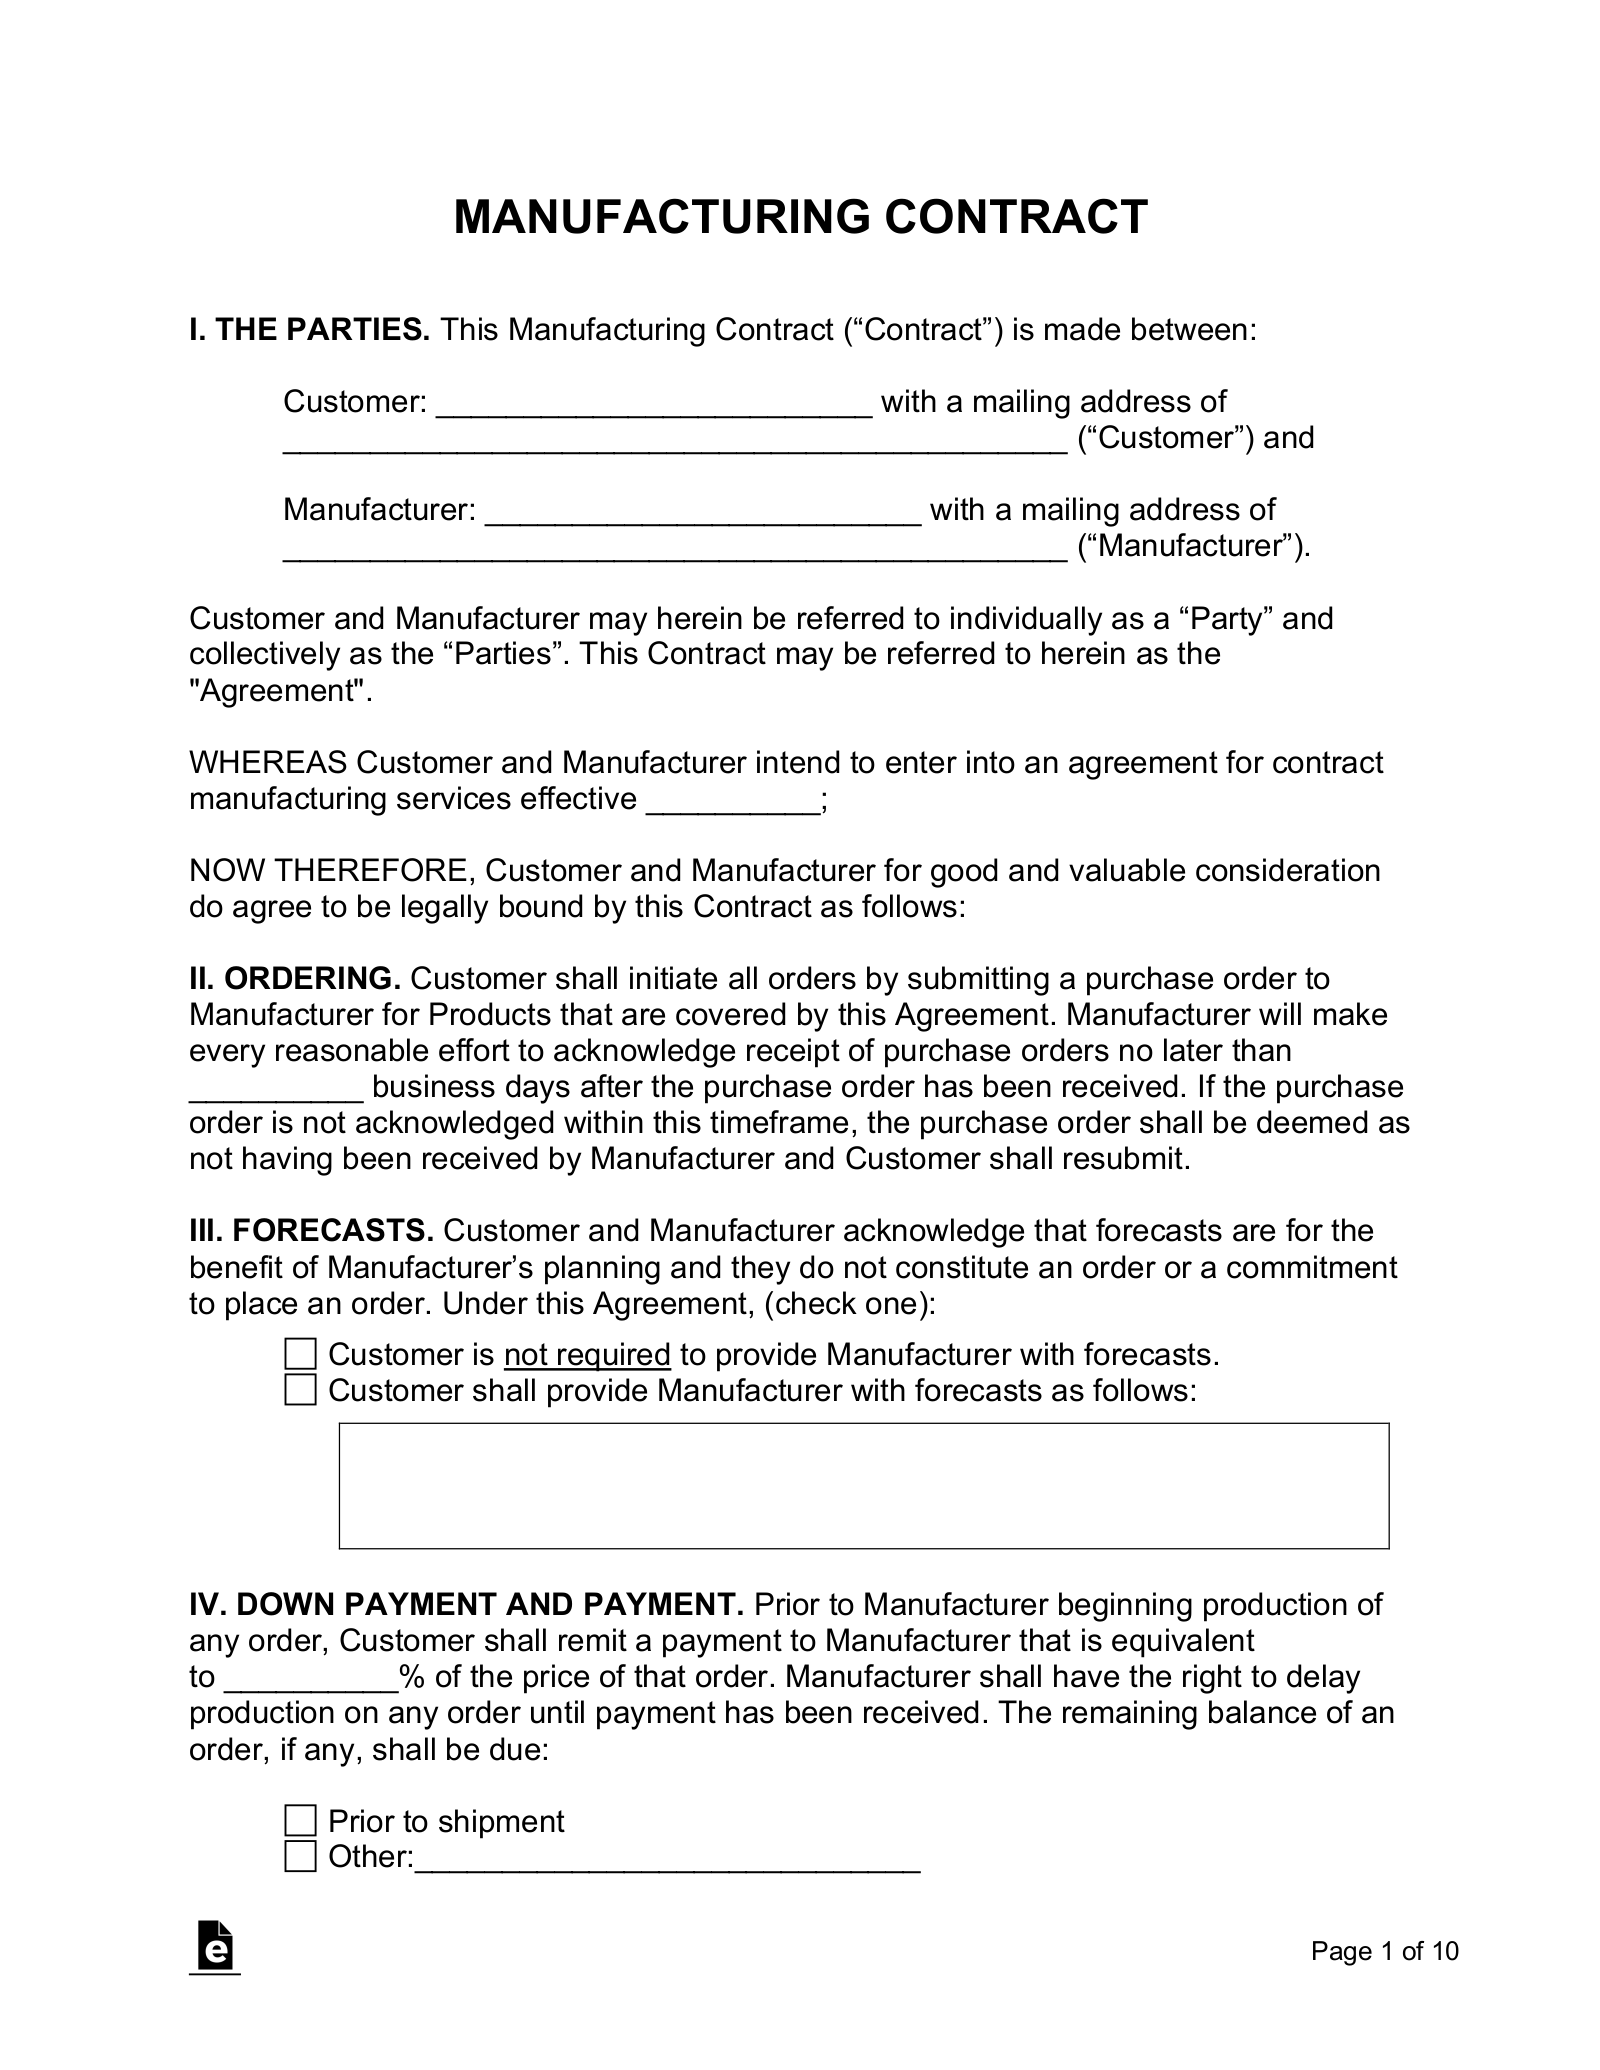 Manufacturing Contract Template